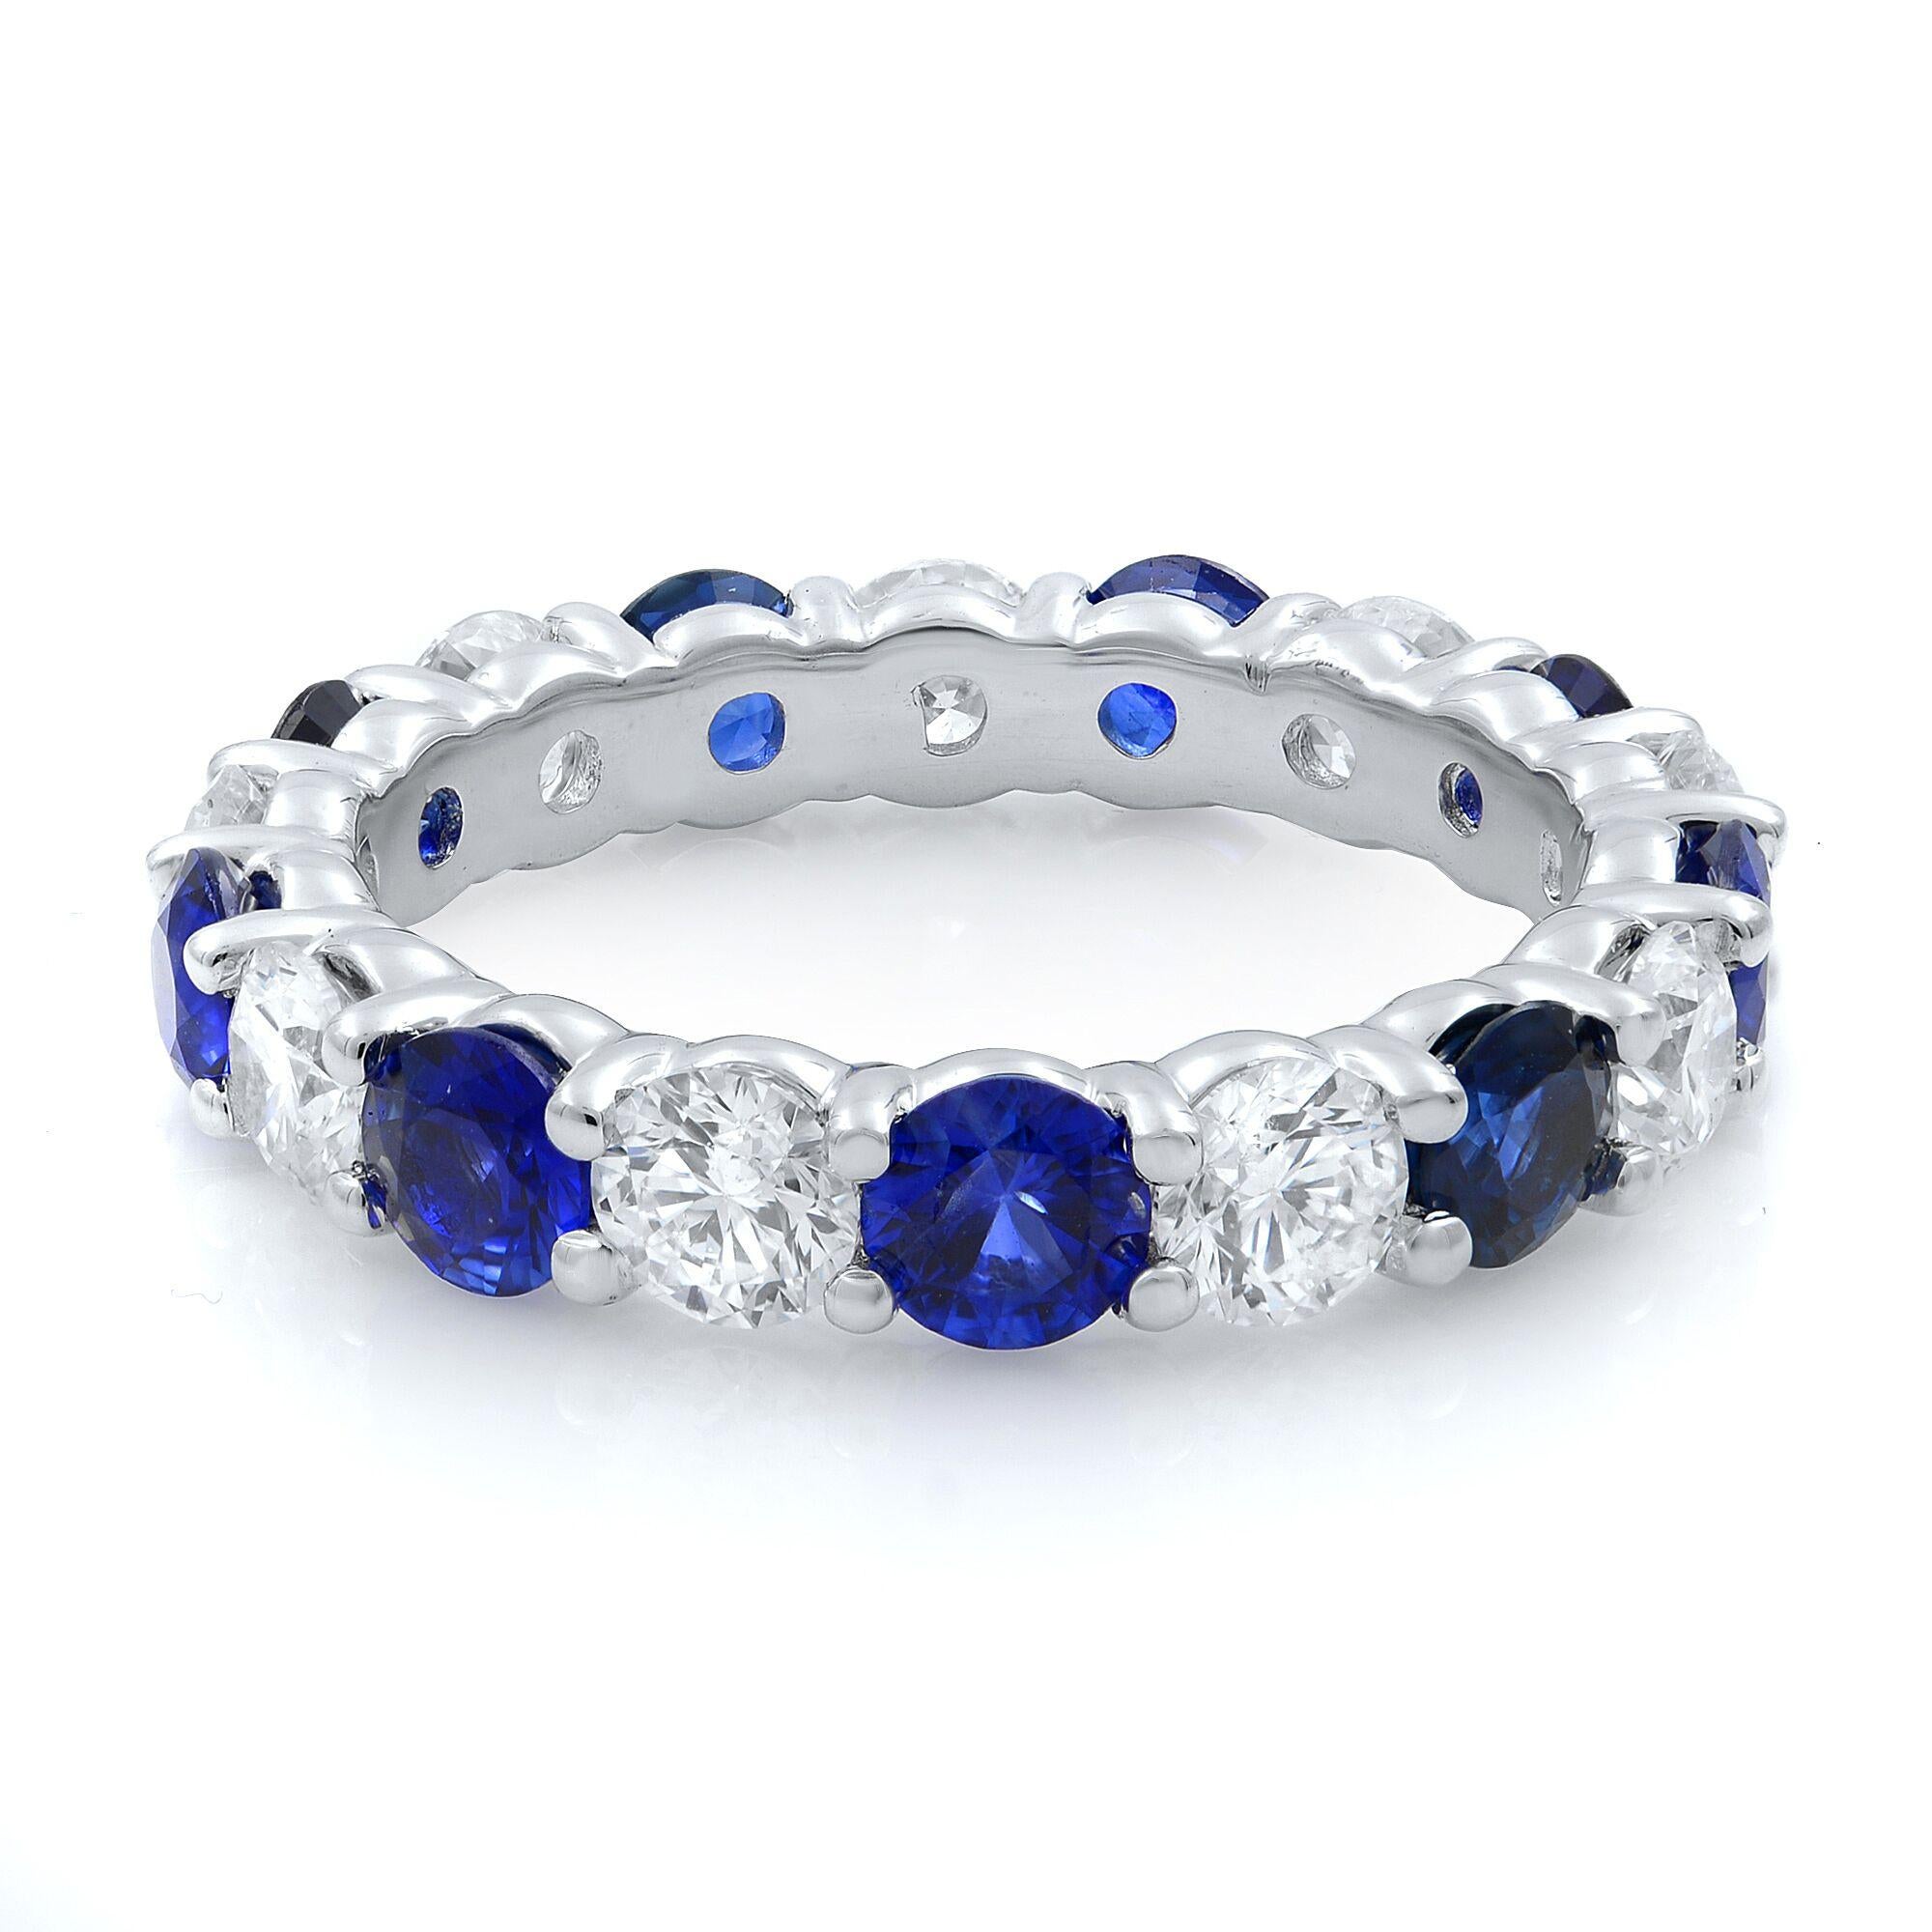 This stunning gemstone eternity band features 9 round blue sapphires alternating with 9 brilliant cut diamonds. The stones are beautifully circling all the way around the band and are set in an elegant 18k white gold shared prong setting.
Wear it as